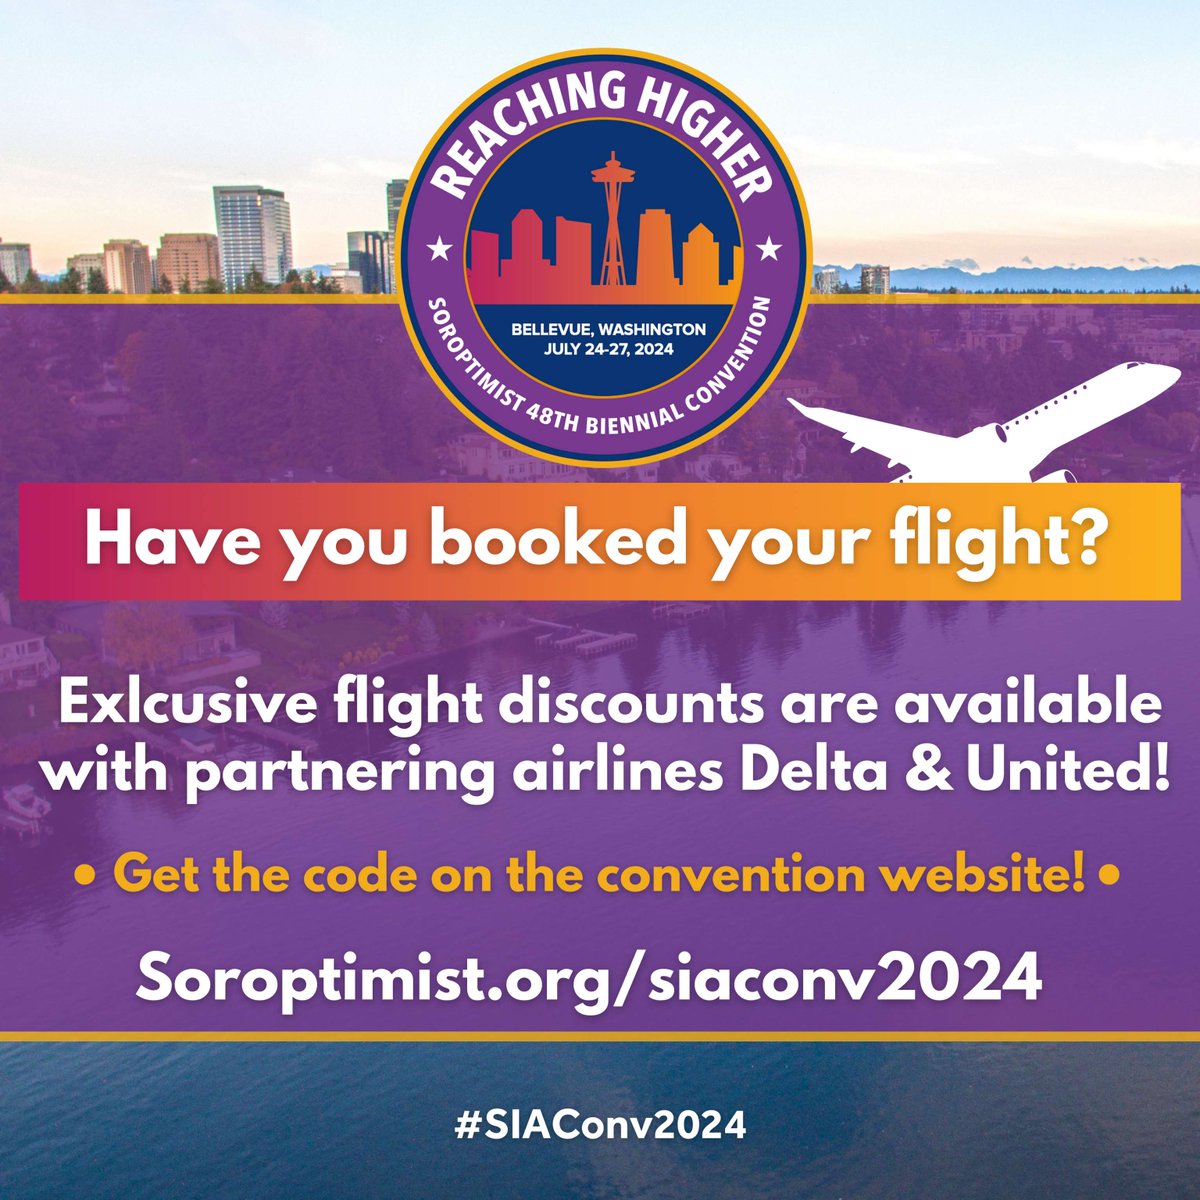 Have you booked your flight for our 48th Biennial Convention? Check out the convention website to unlock exclusive savings with flight discounts offered by Delta and United! ✈️ soroptimist.org/siaconv2024 #siaconv2024